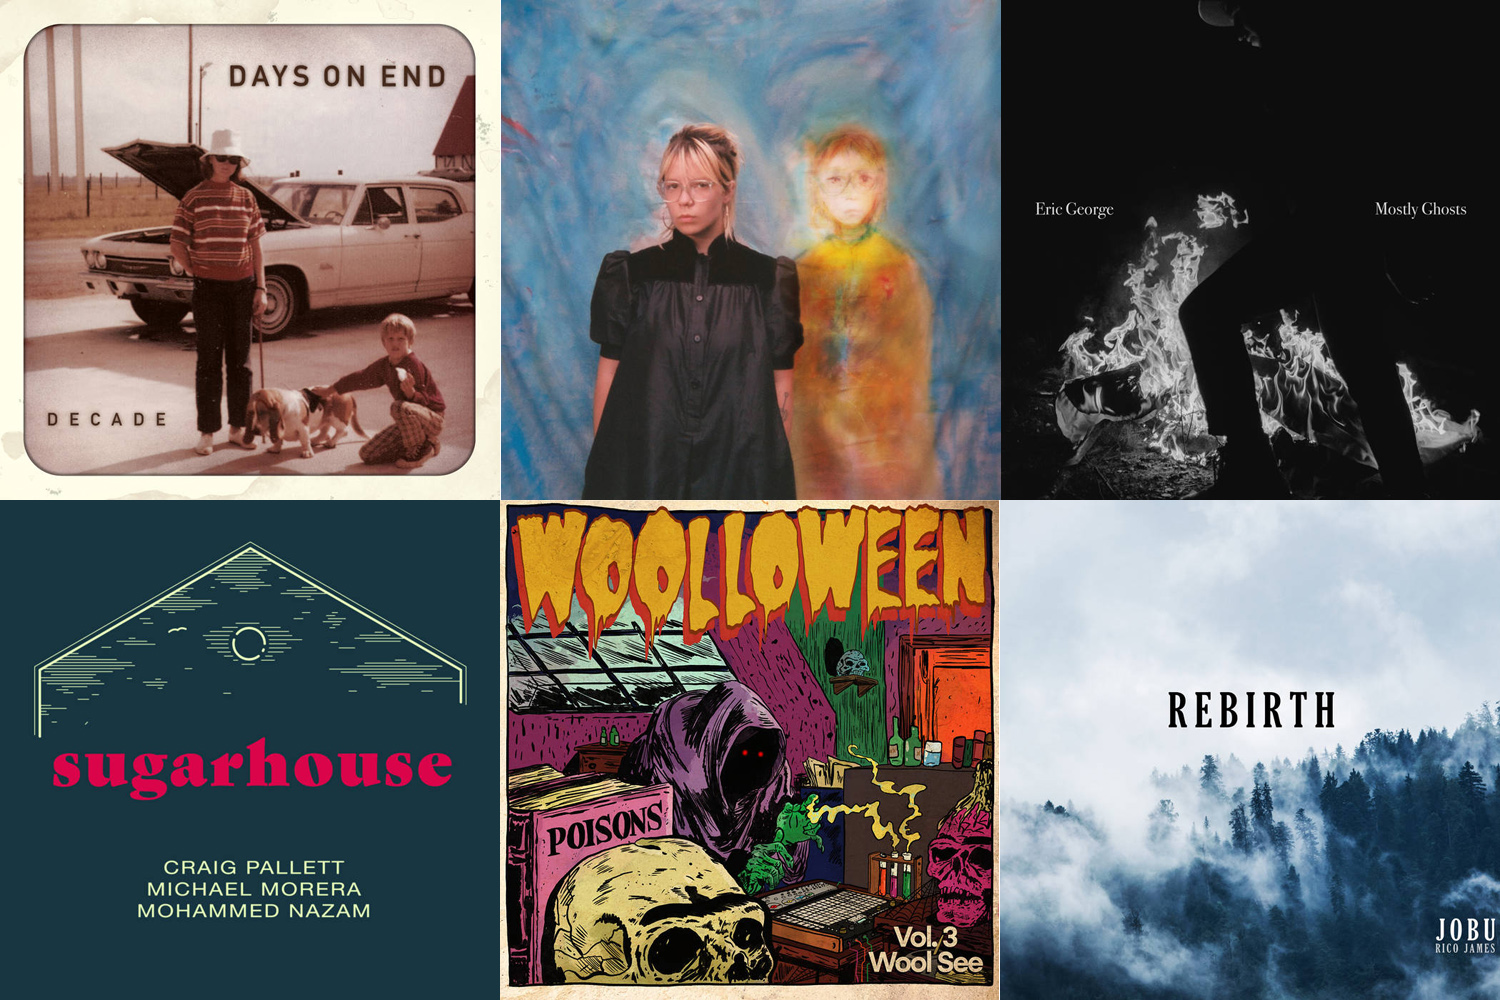 The Best New Songs of October